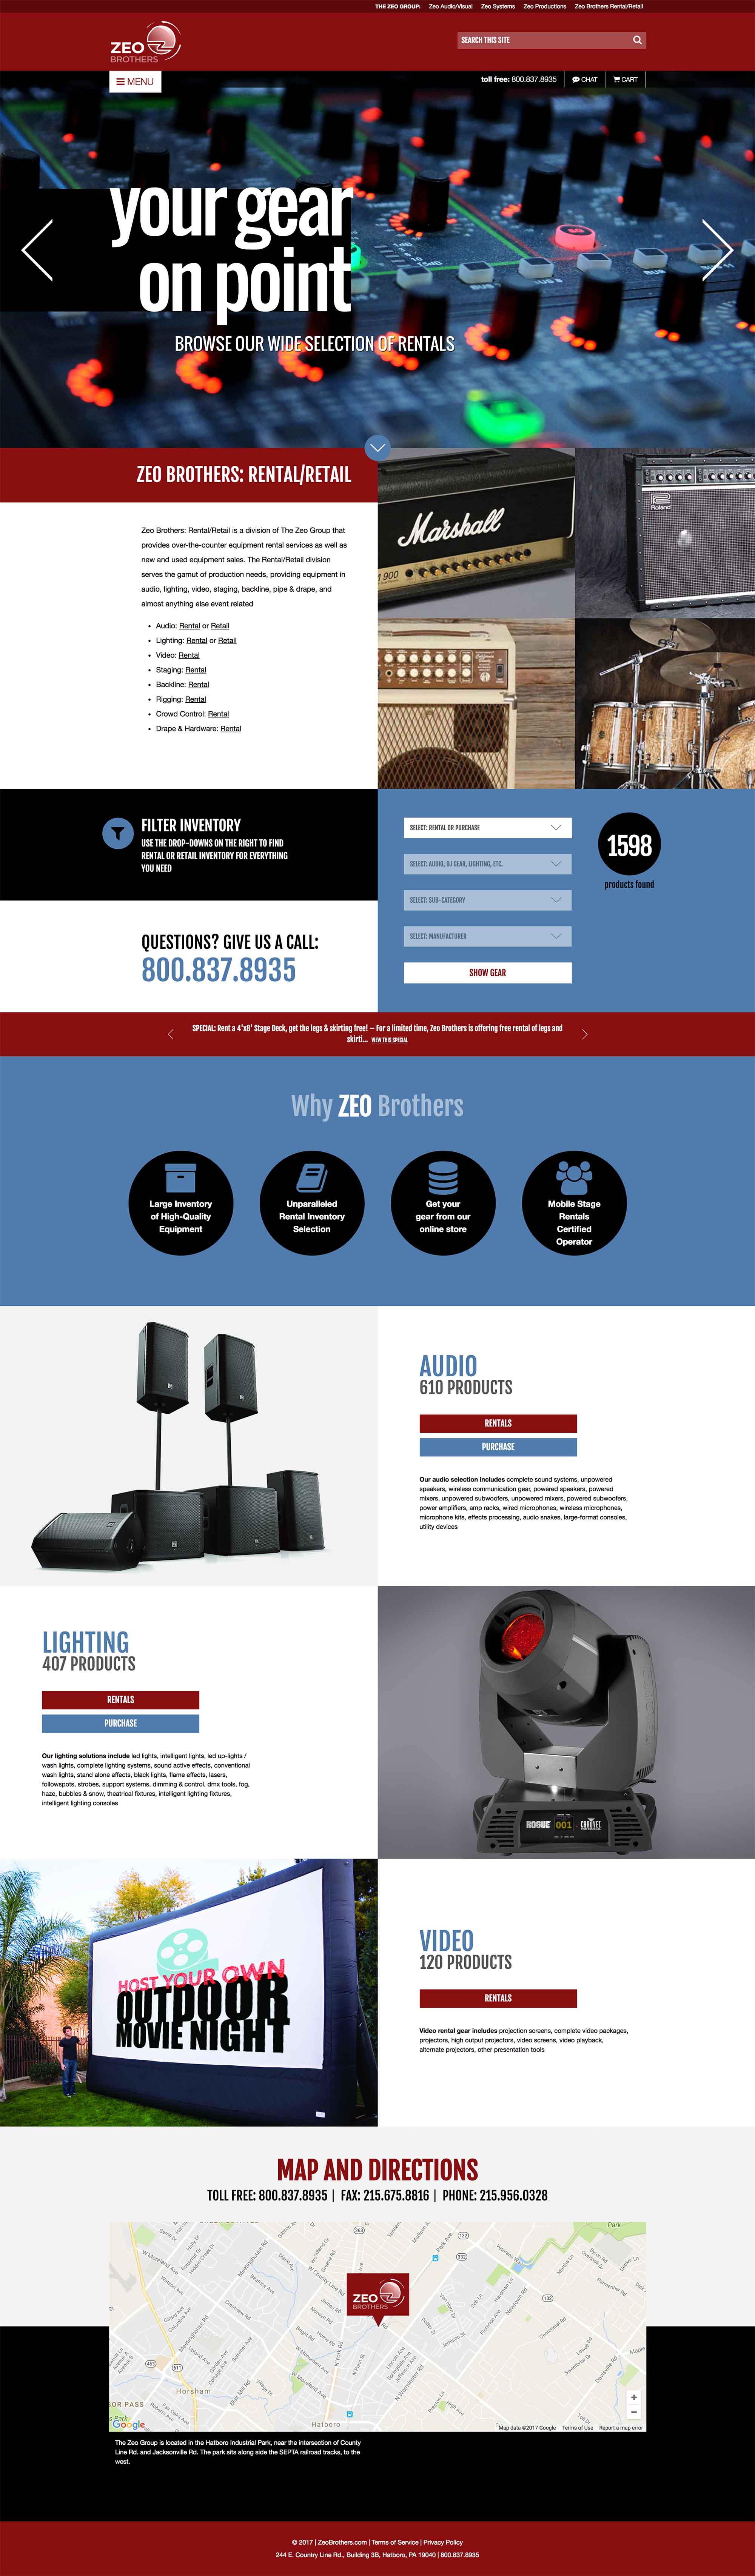 Screen shot of the Zeo Brothers WordPress and WooCommerce web site by Lee Powers.